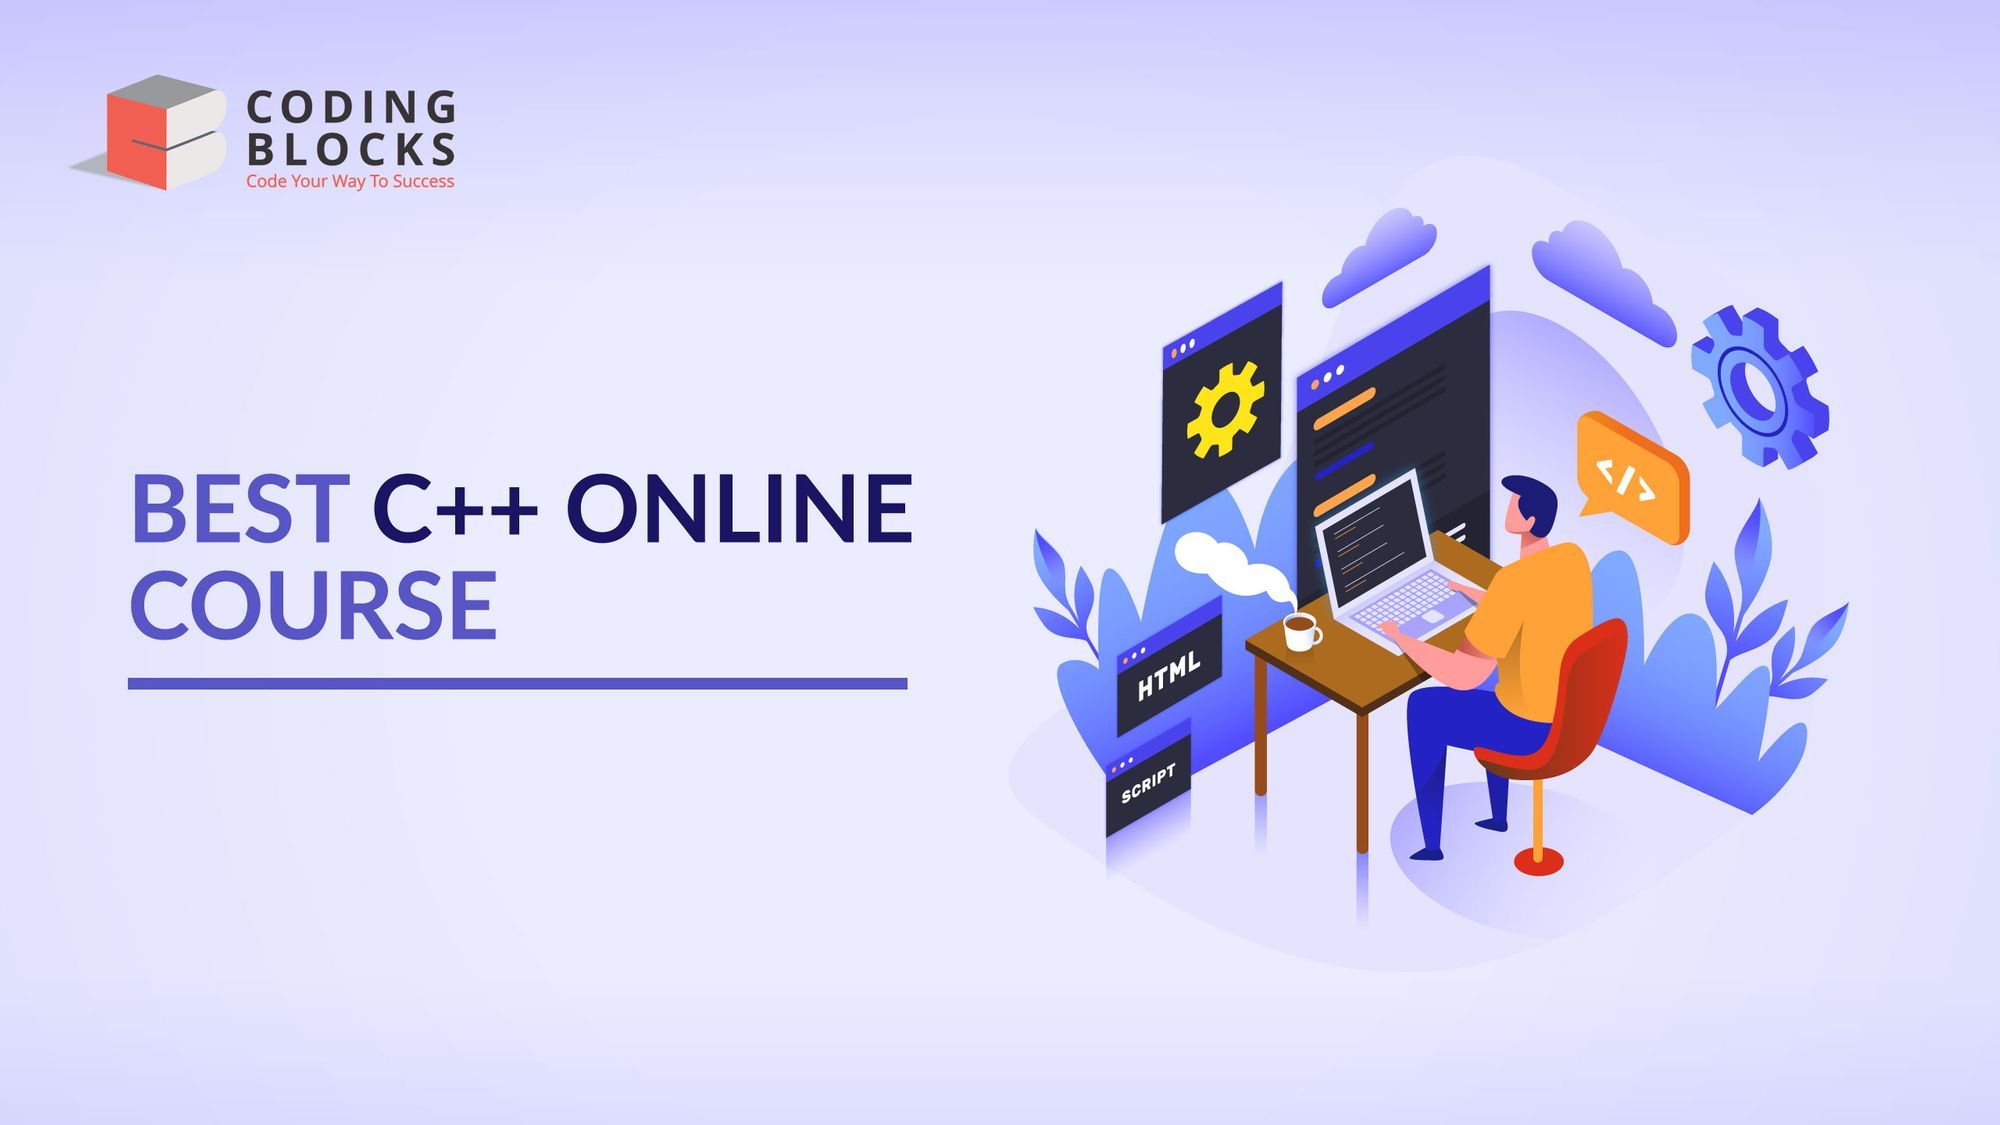 Best Online C++ Course to Buy for Beginners in 2019